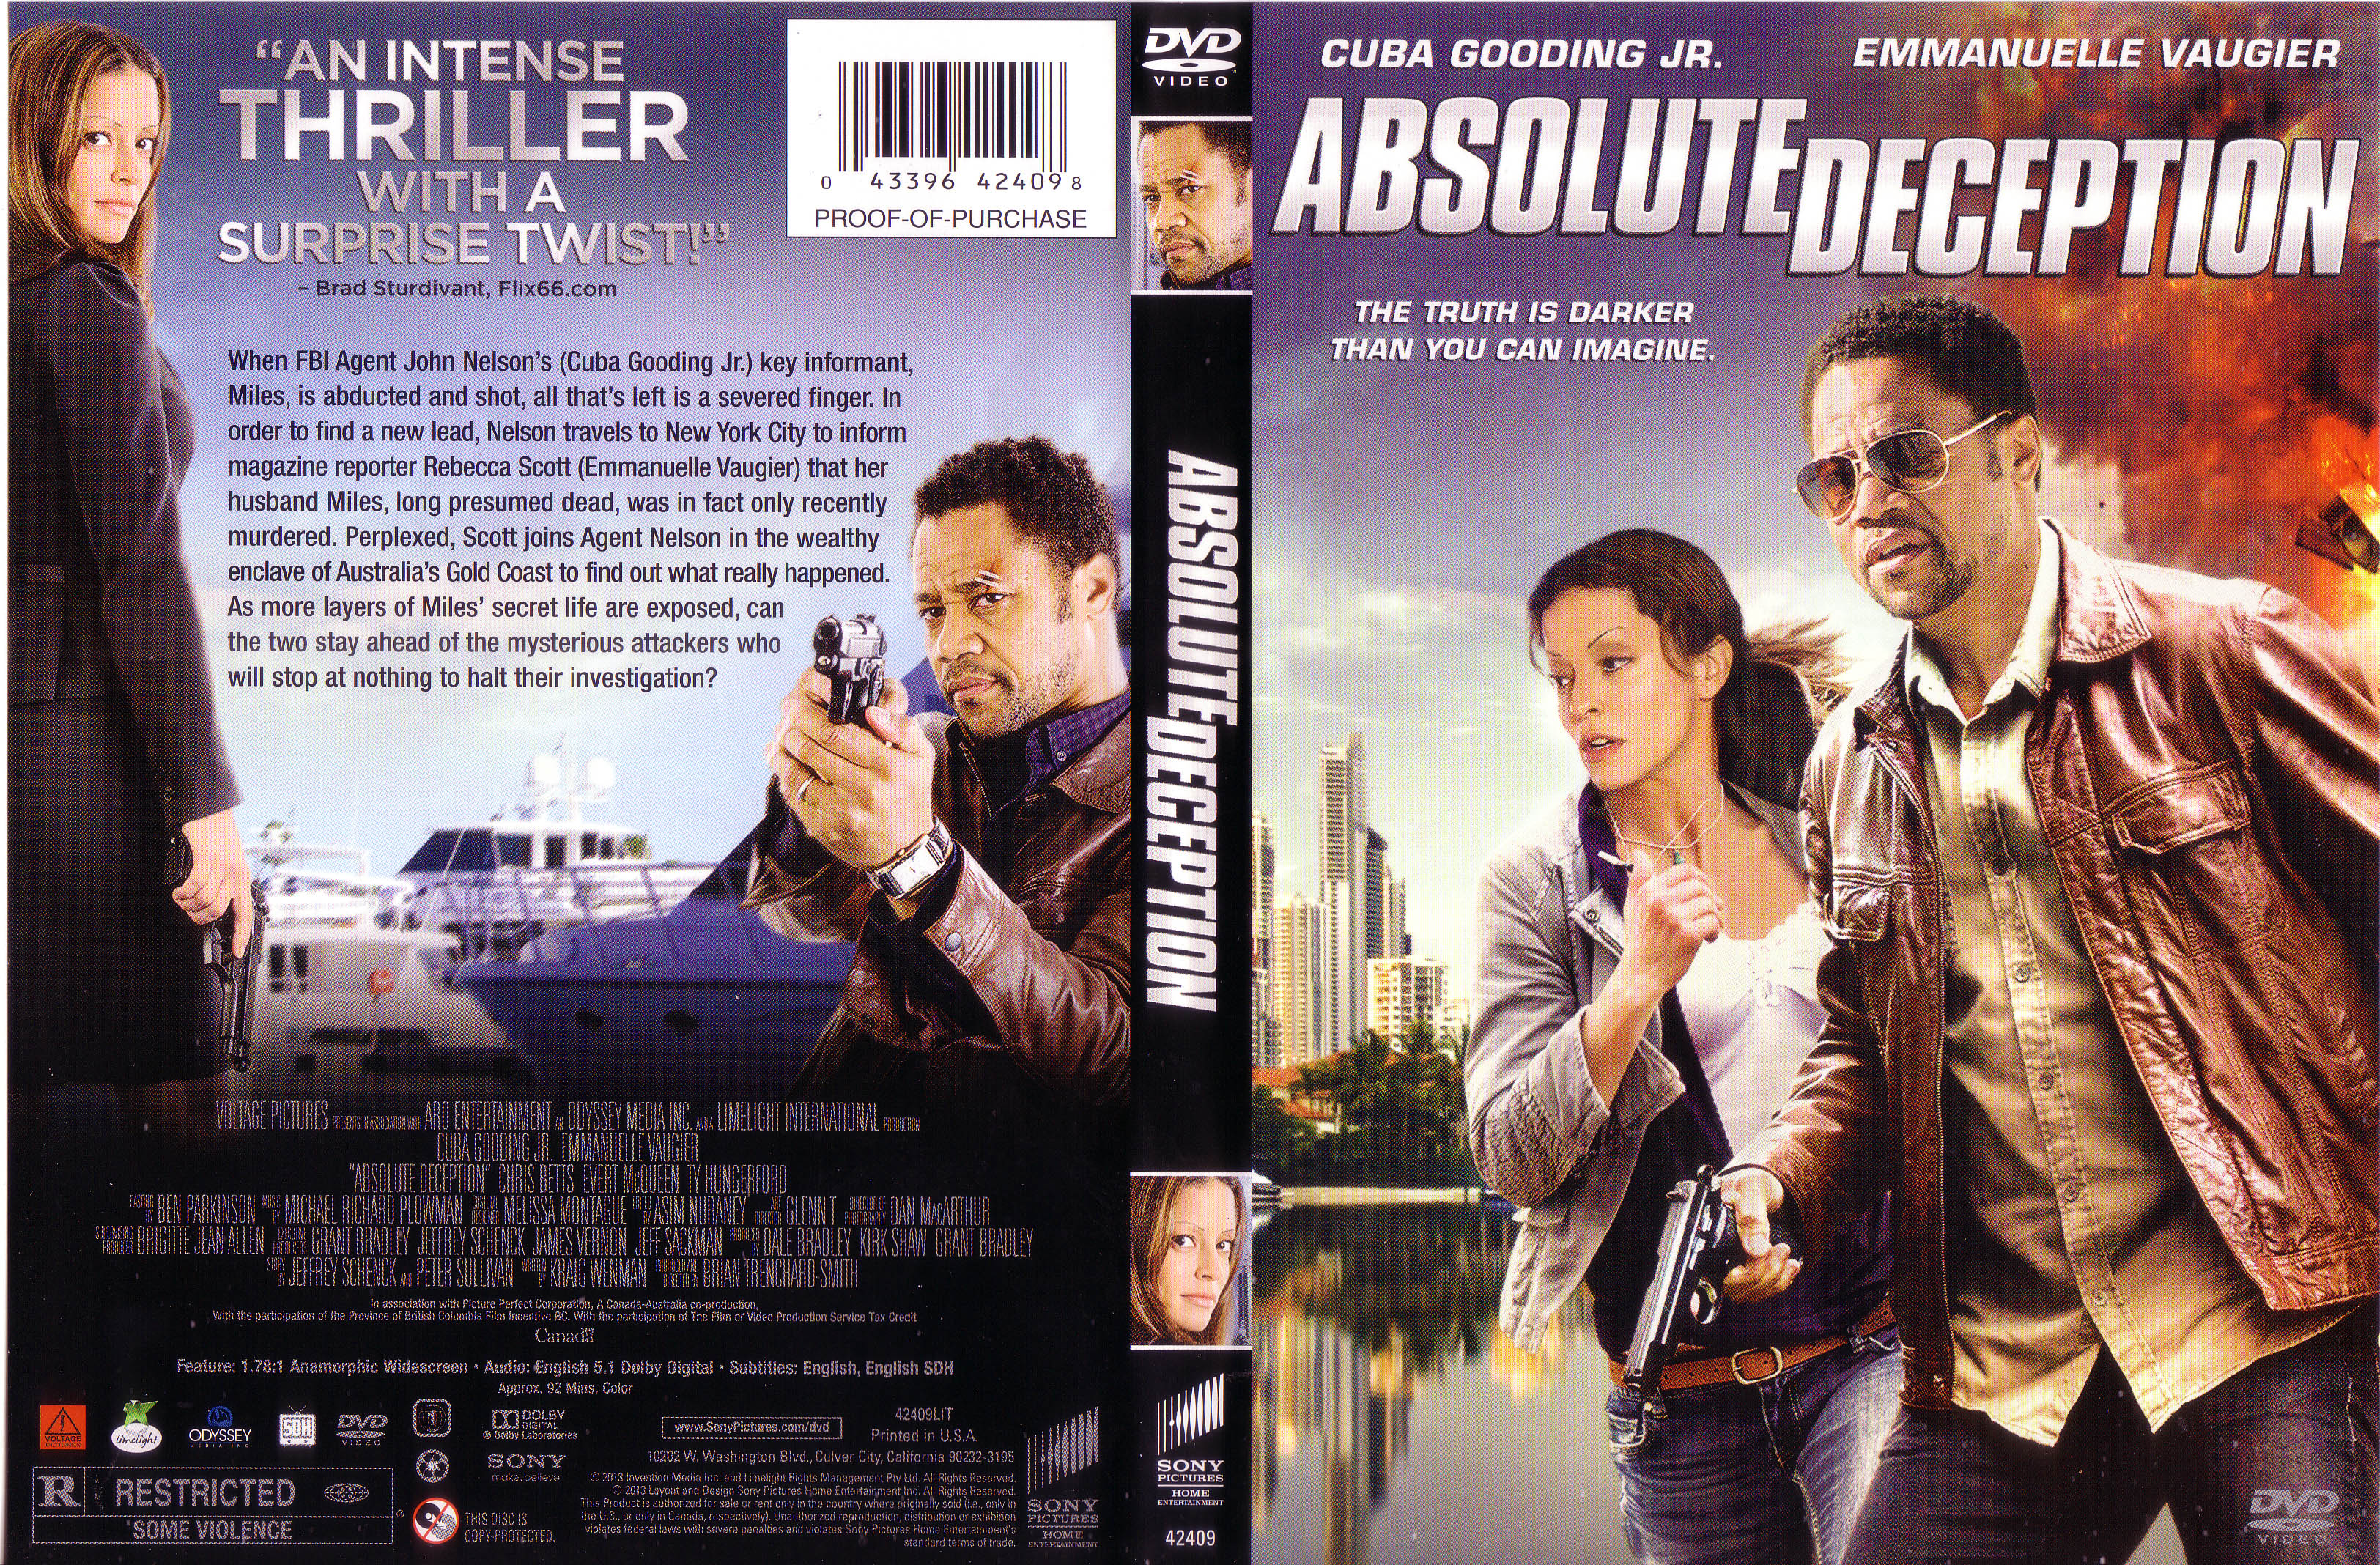 Jaquette DVD Absolute Deception Zone 1